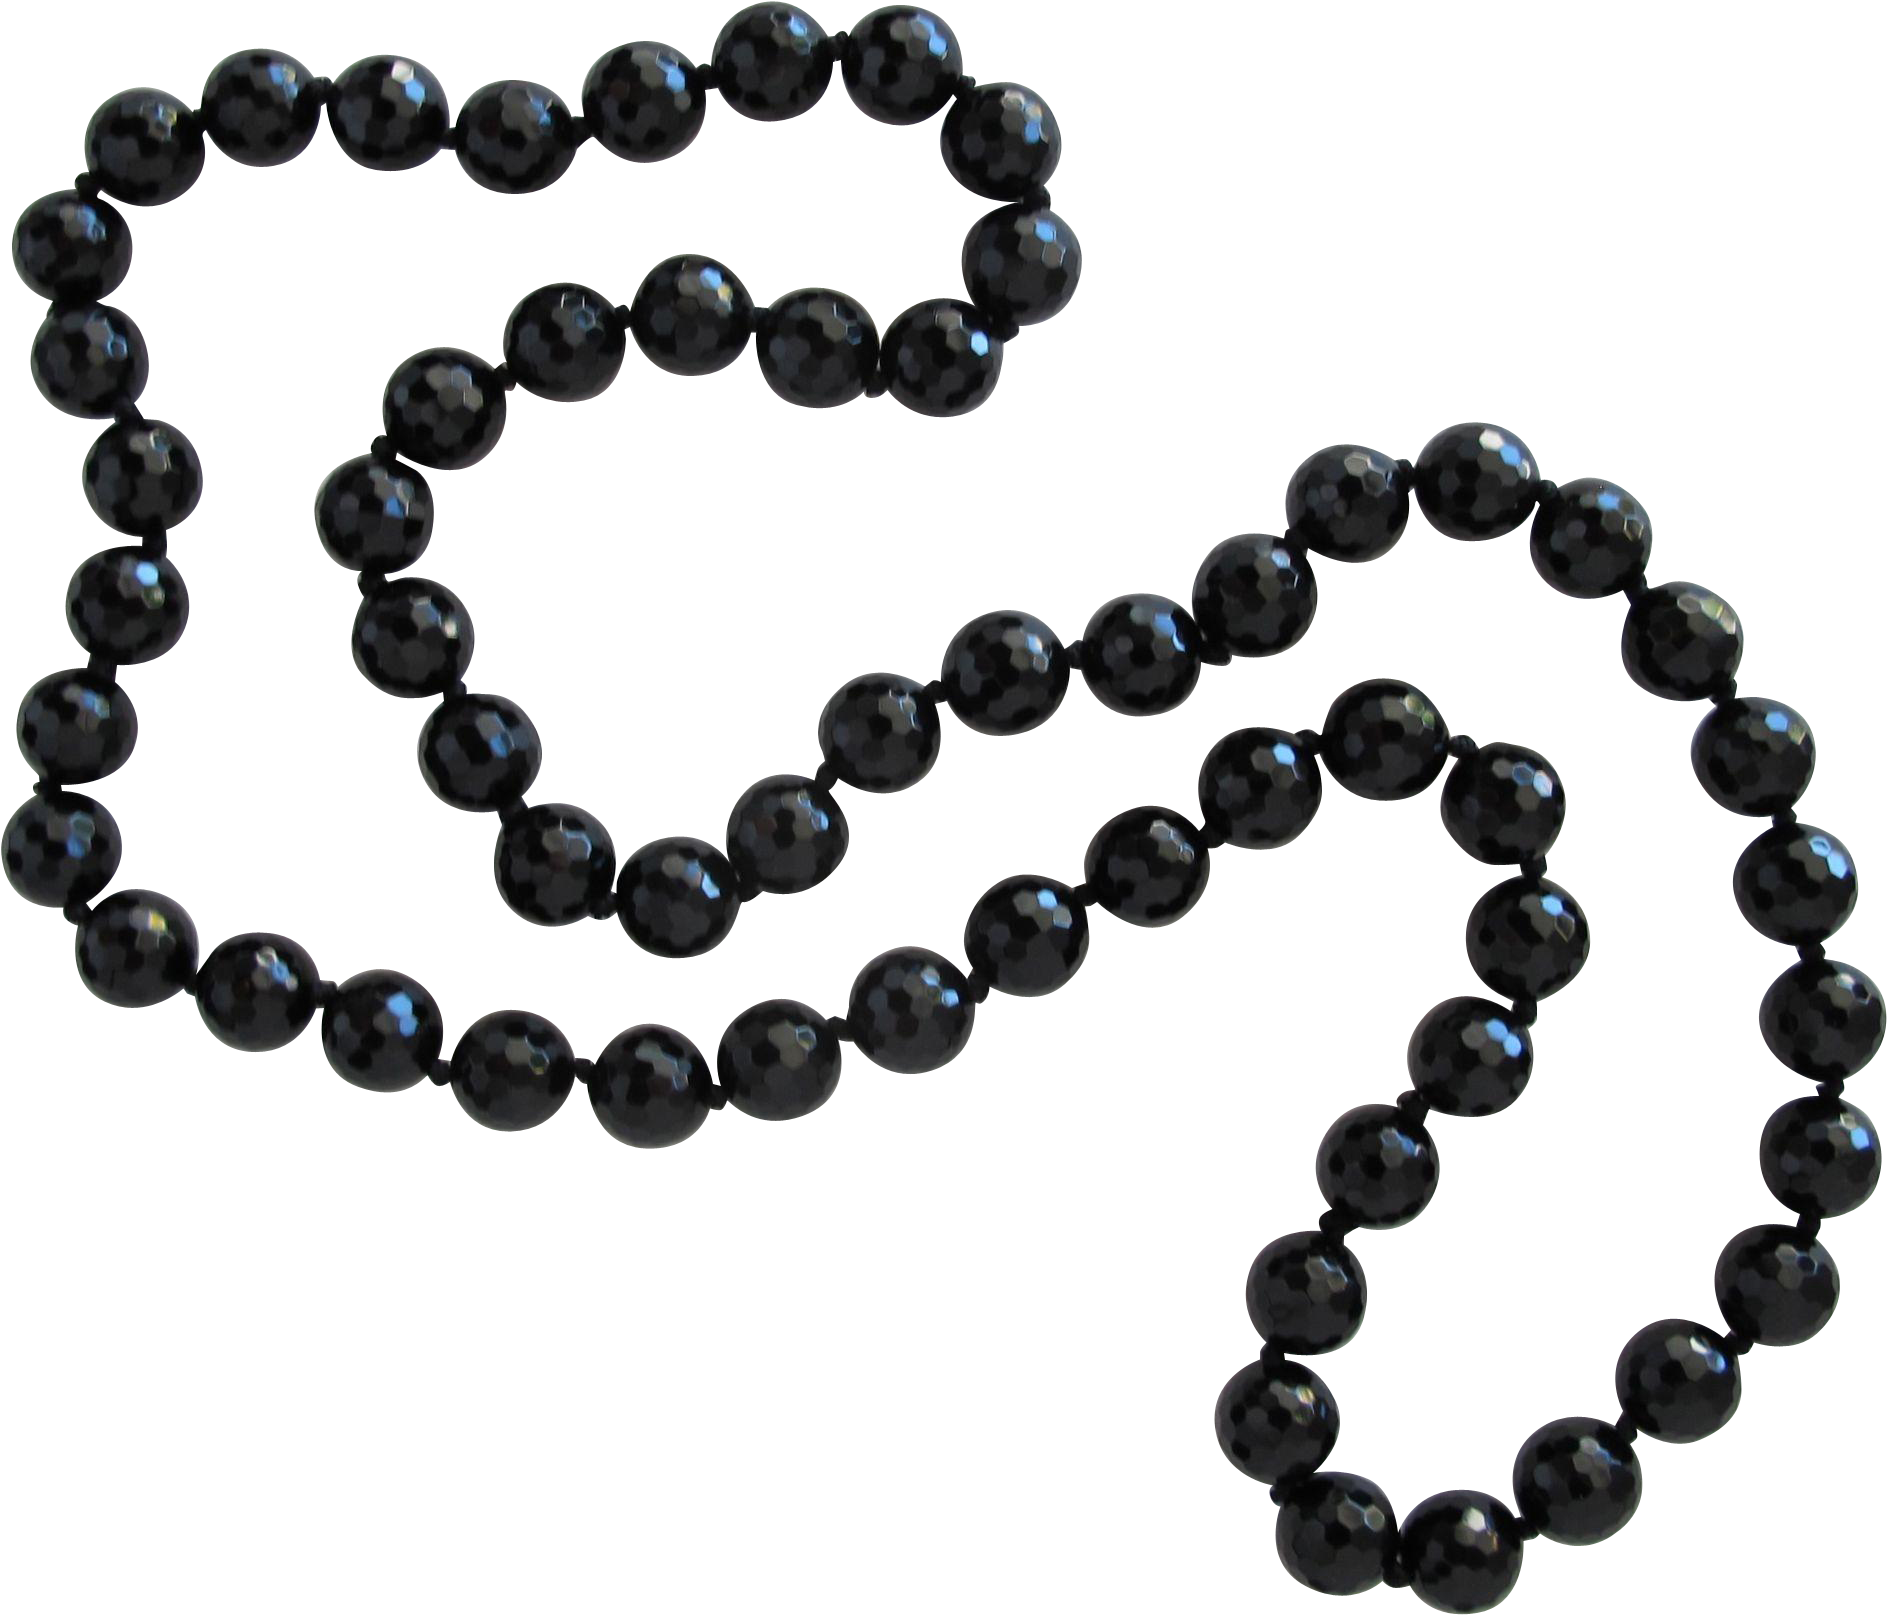 A Black Beaded Necklace